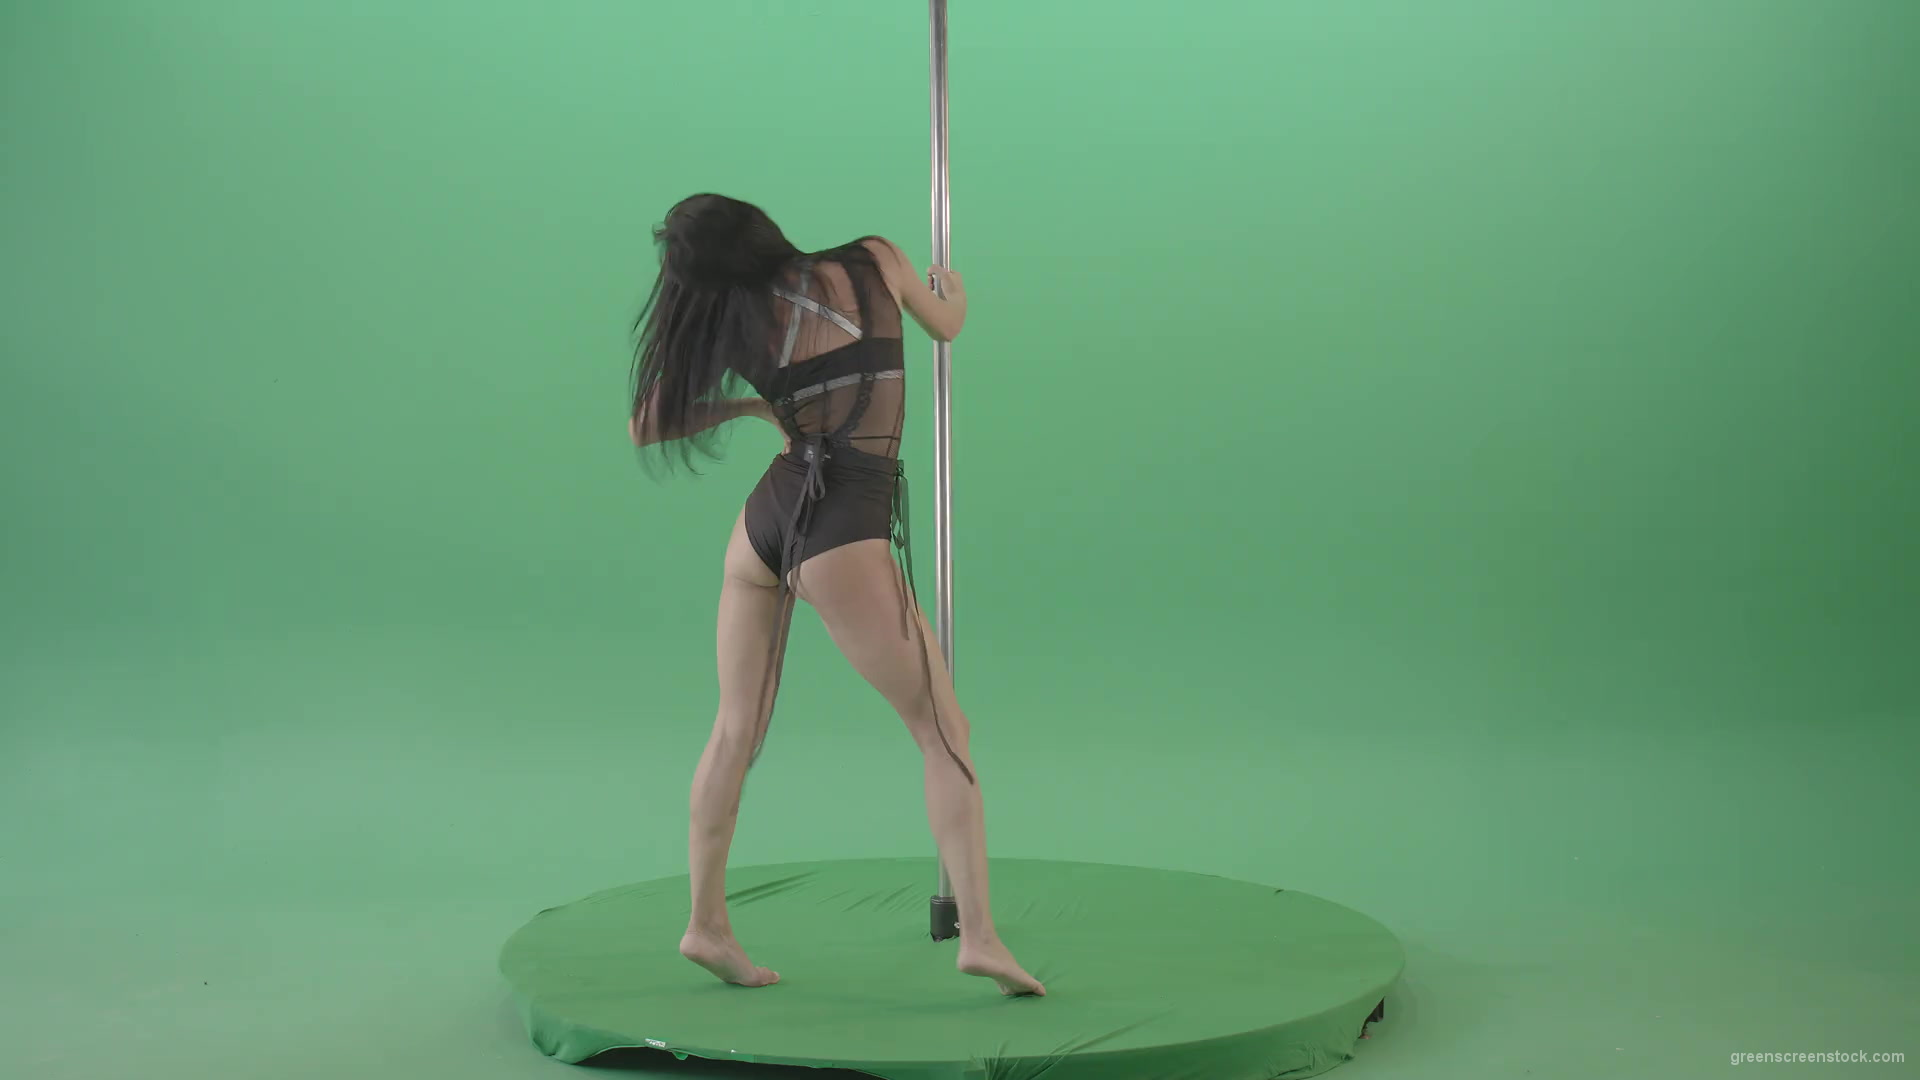 Sexy-girl-in-Lingerie-wear-dancing-strip-pole-dance-isolated-on-green-screen-4K-Video-Footage-1920_001 Green Screen Stock